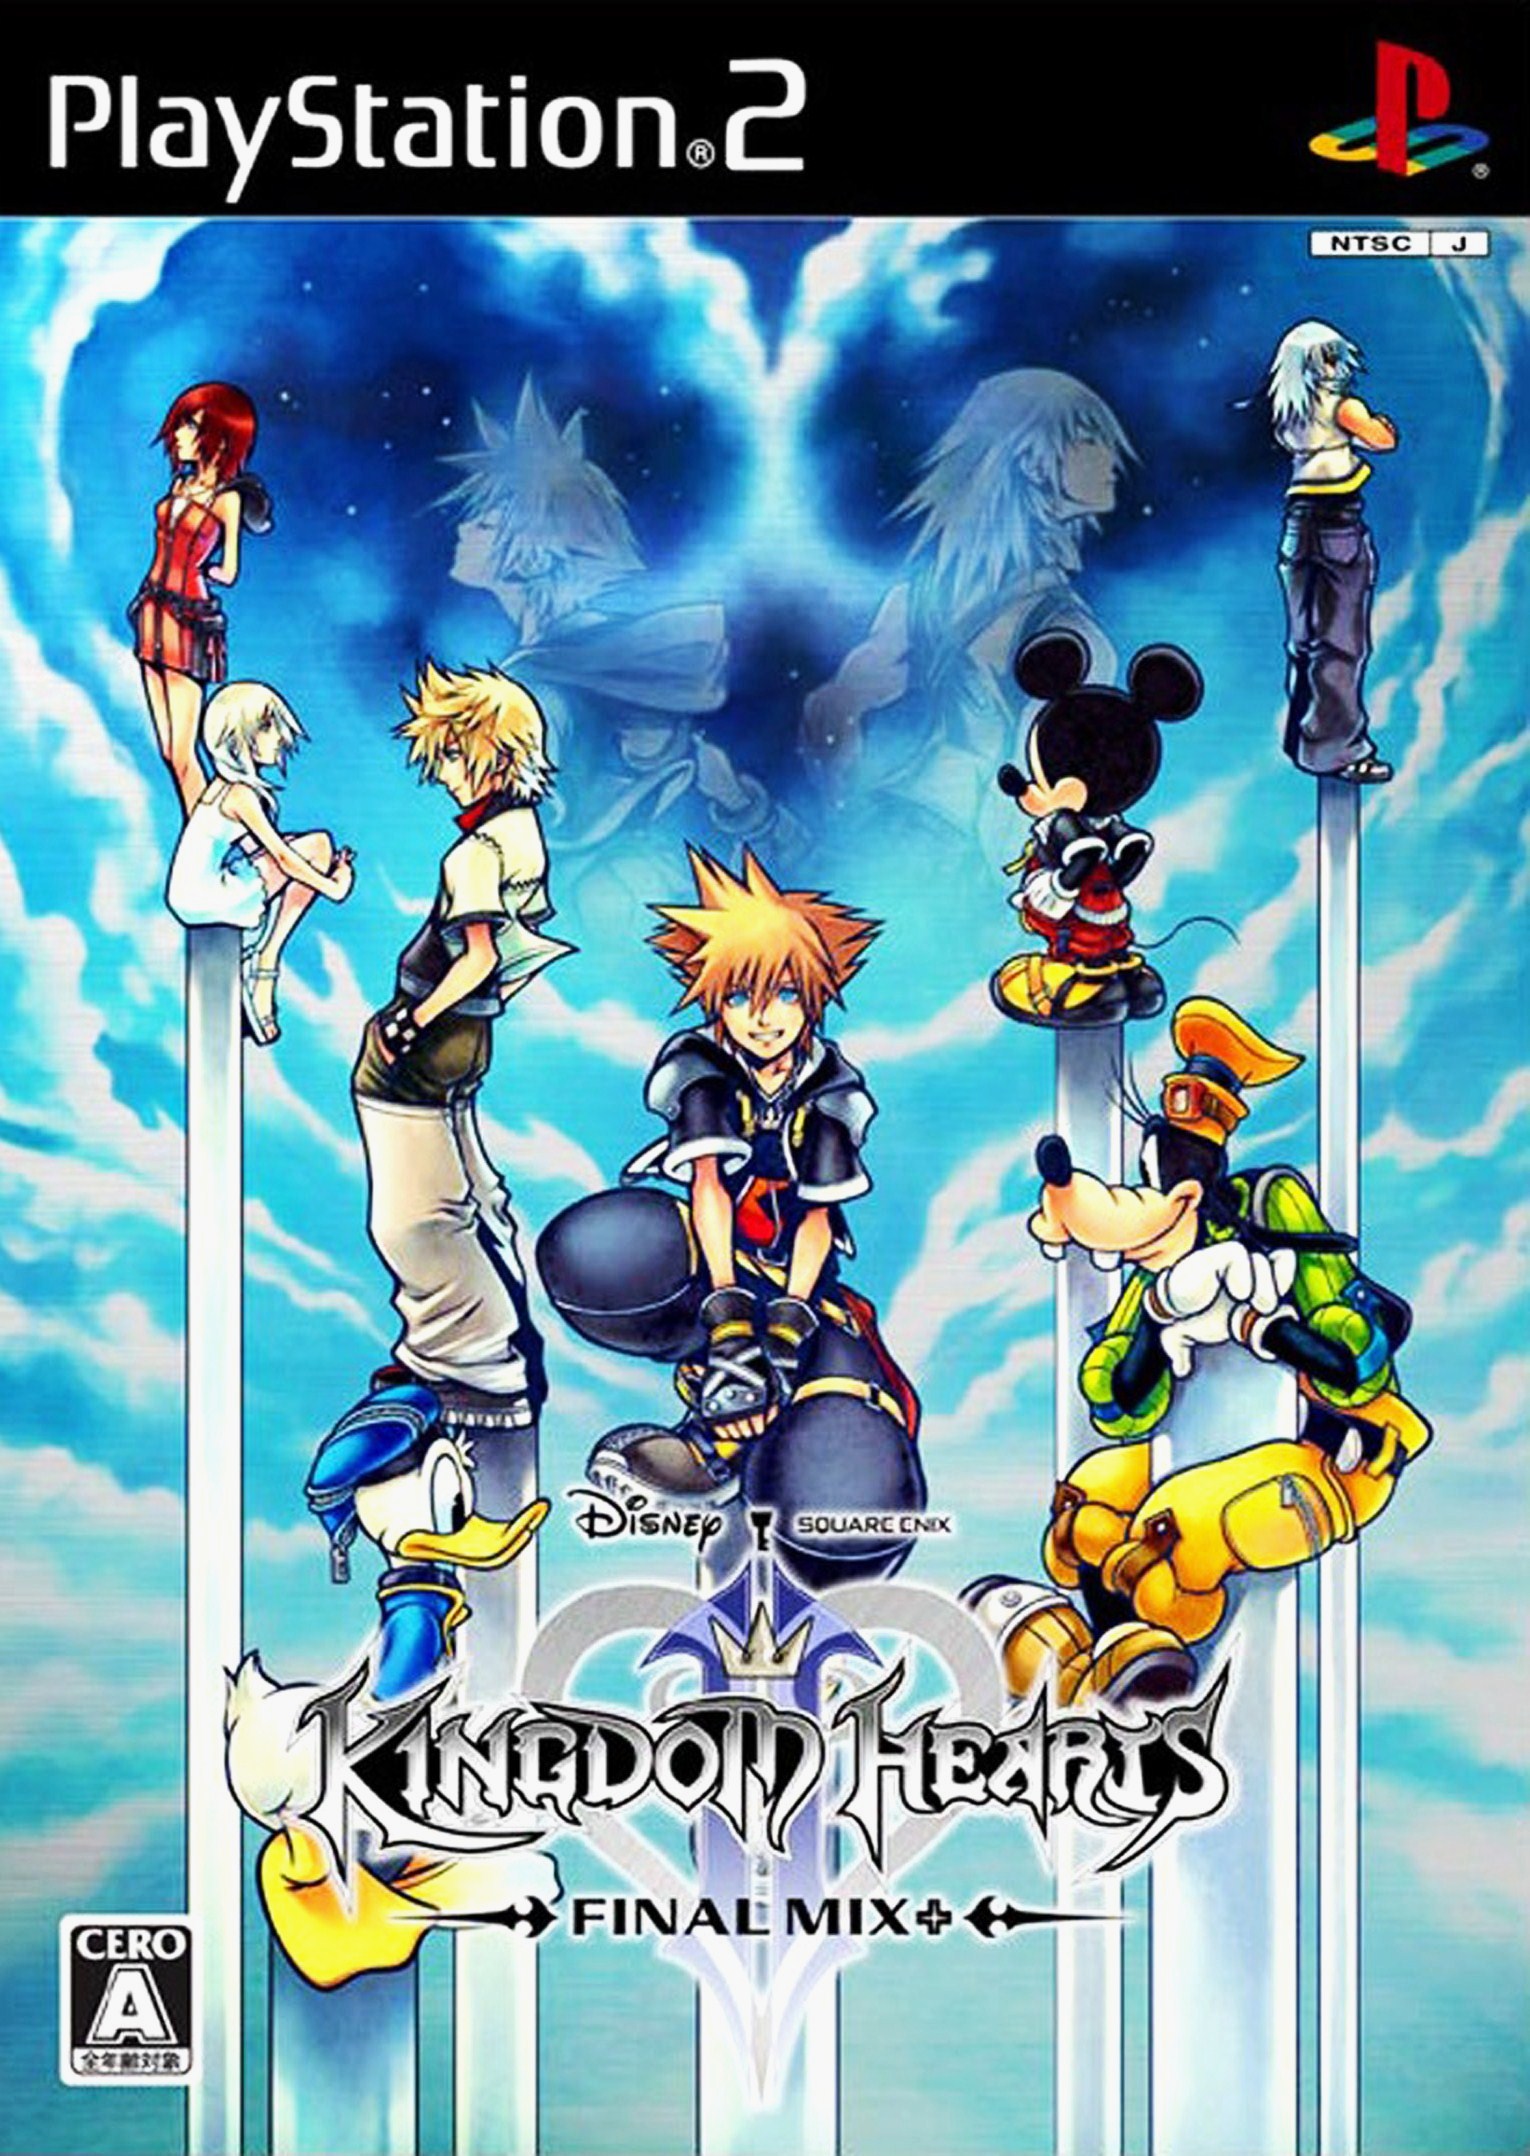 Kingdom Hearts II: Final Mix+ - Télécharger ROM ISO - RomStation